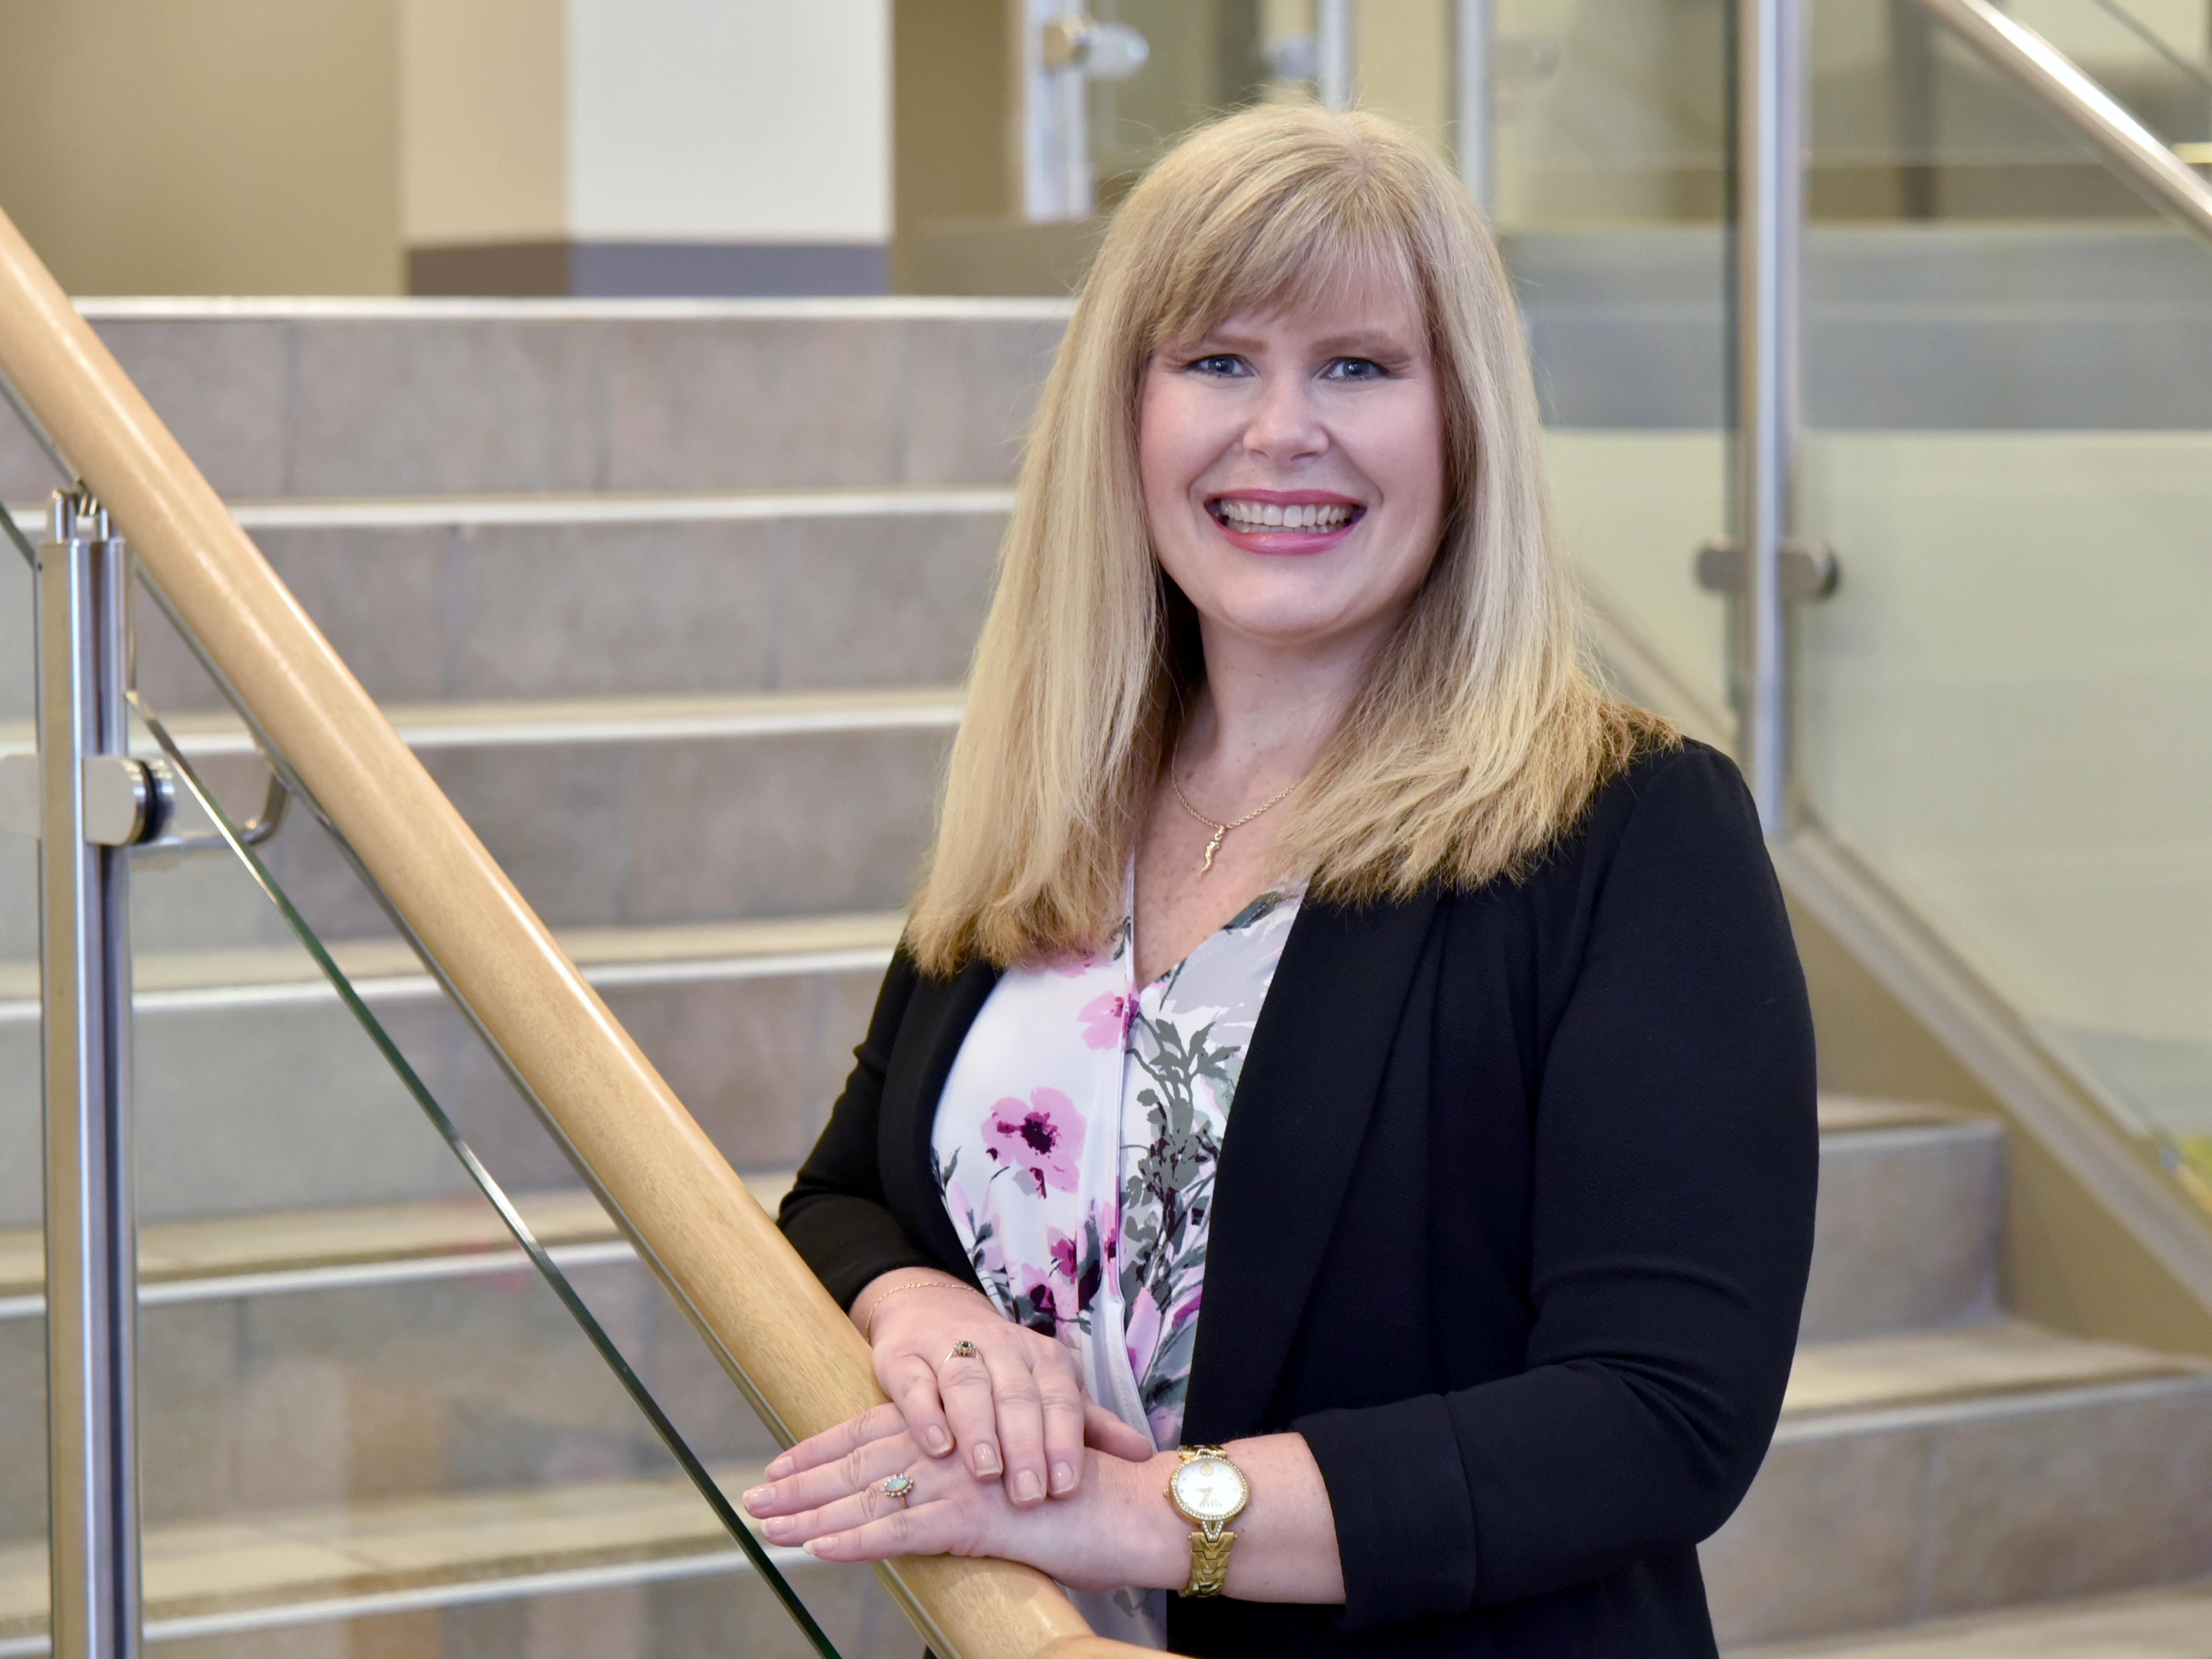 Outstanding work in customer service, technological projects and overall support recently earned Michele May earns the Chancellor’s Award for Excellence in Classified Service